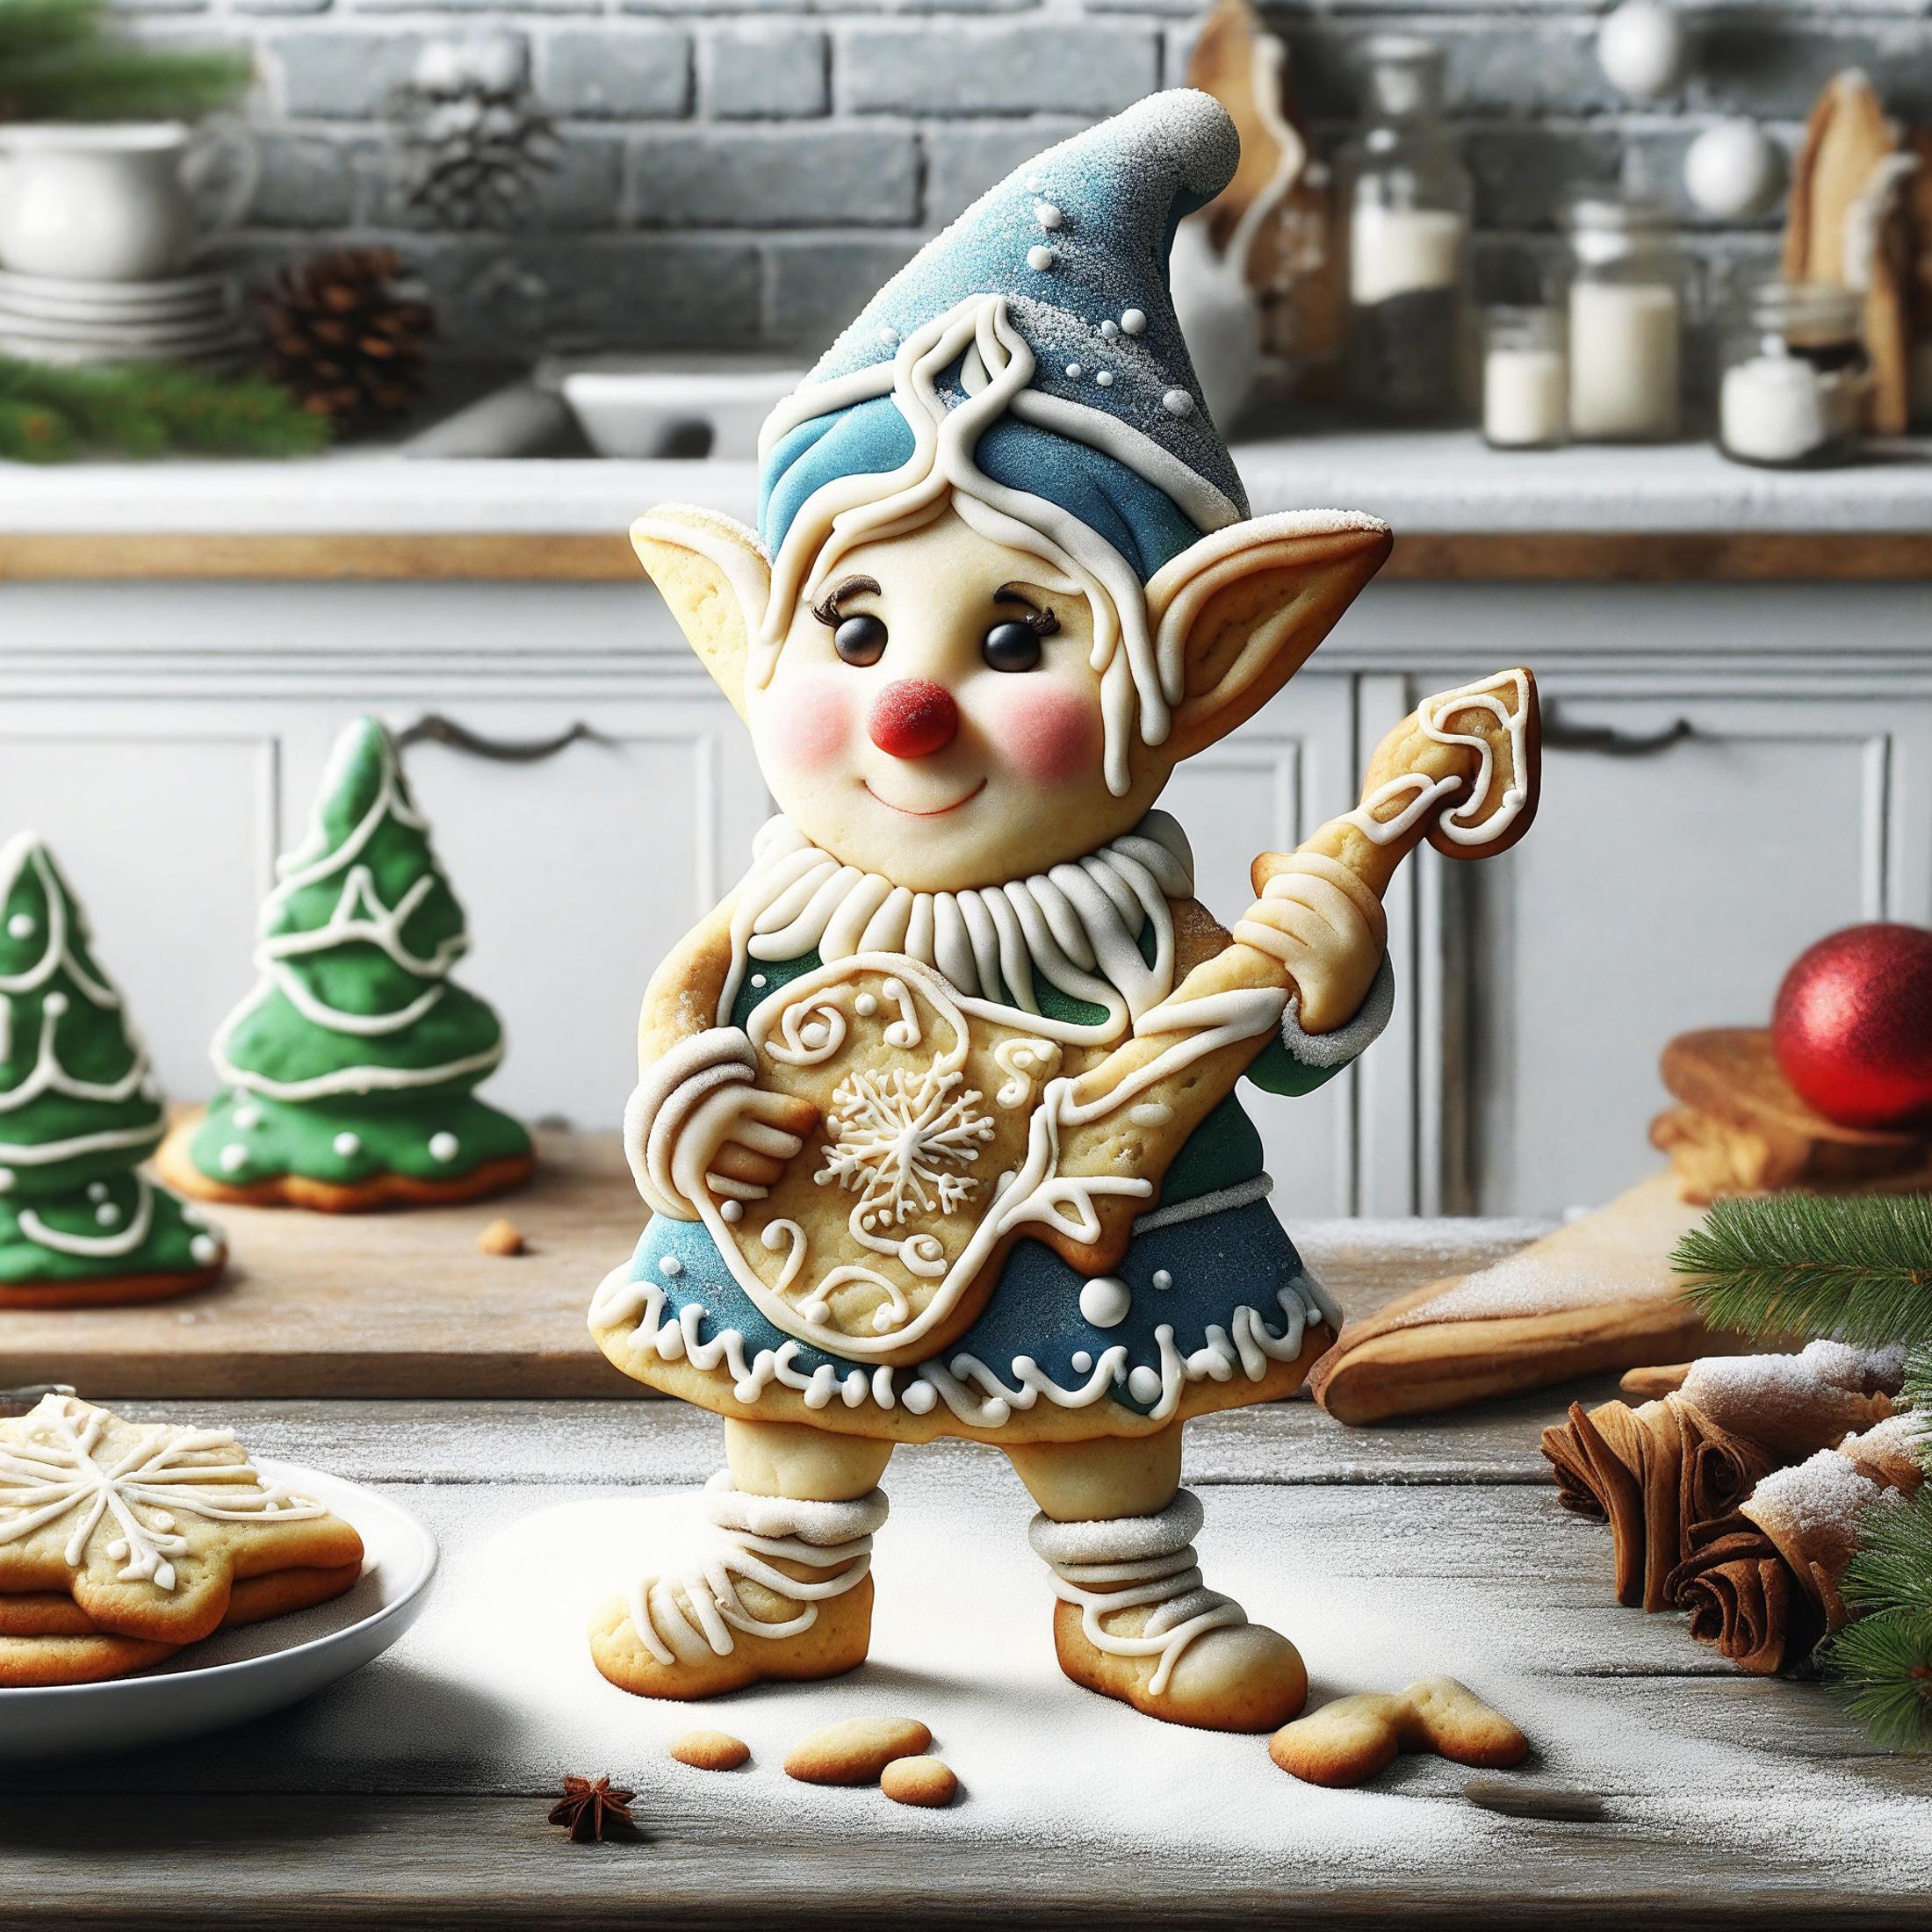 A Christmas elf playing a guitar made of cookies.